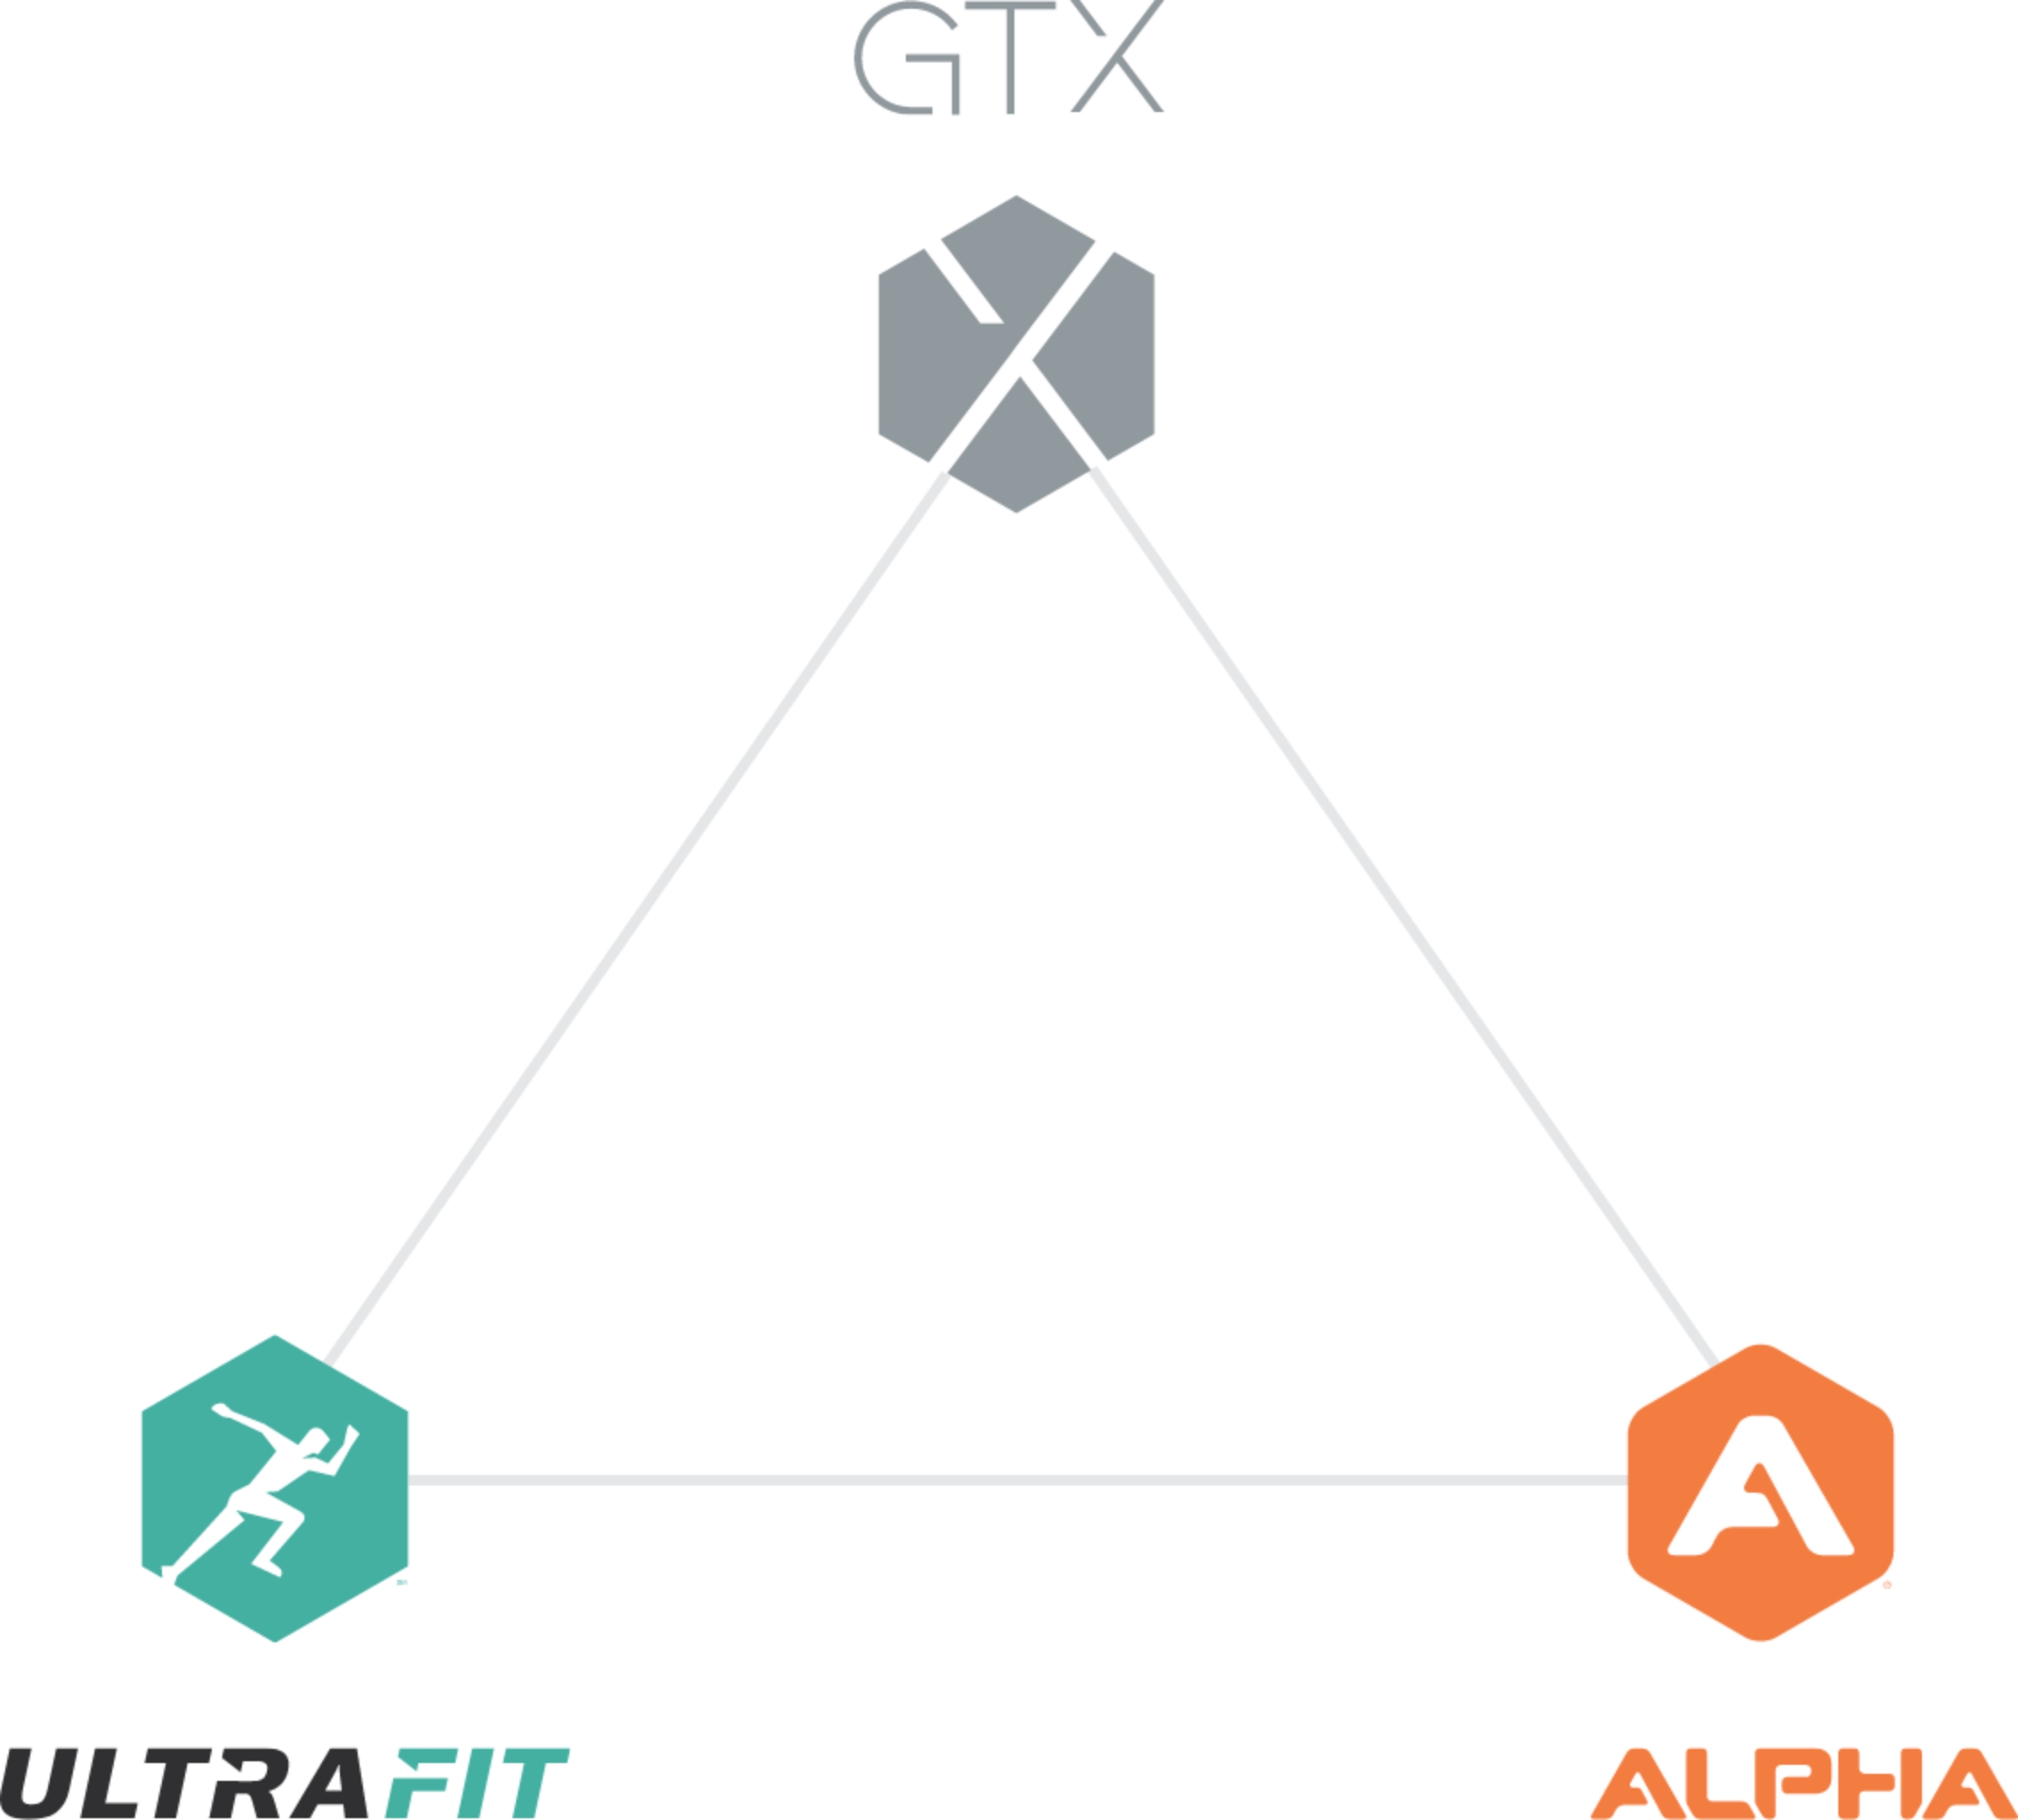 Logos of the three programs that make up small group training (GTX, Alpha and Ultra Fit) are arranged in a triangle with lines connecting them to demonstrate an ecosystem. 